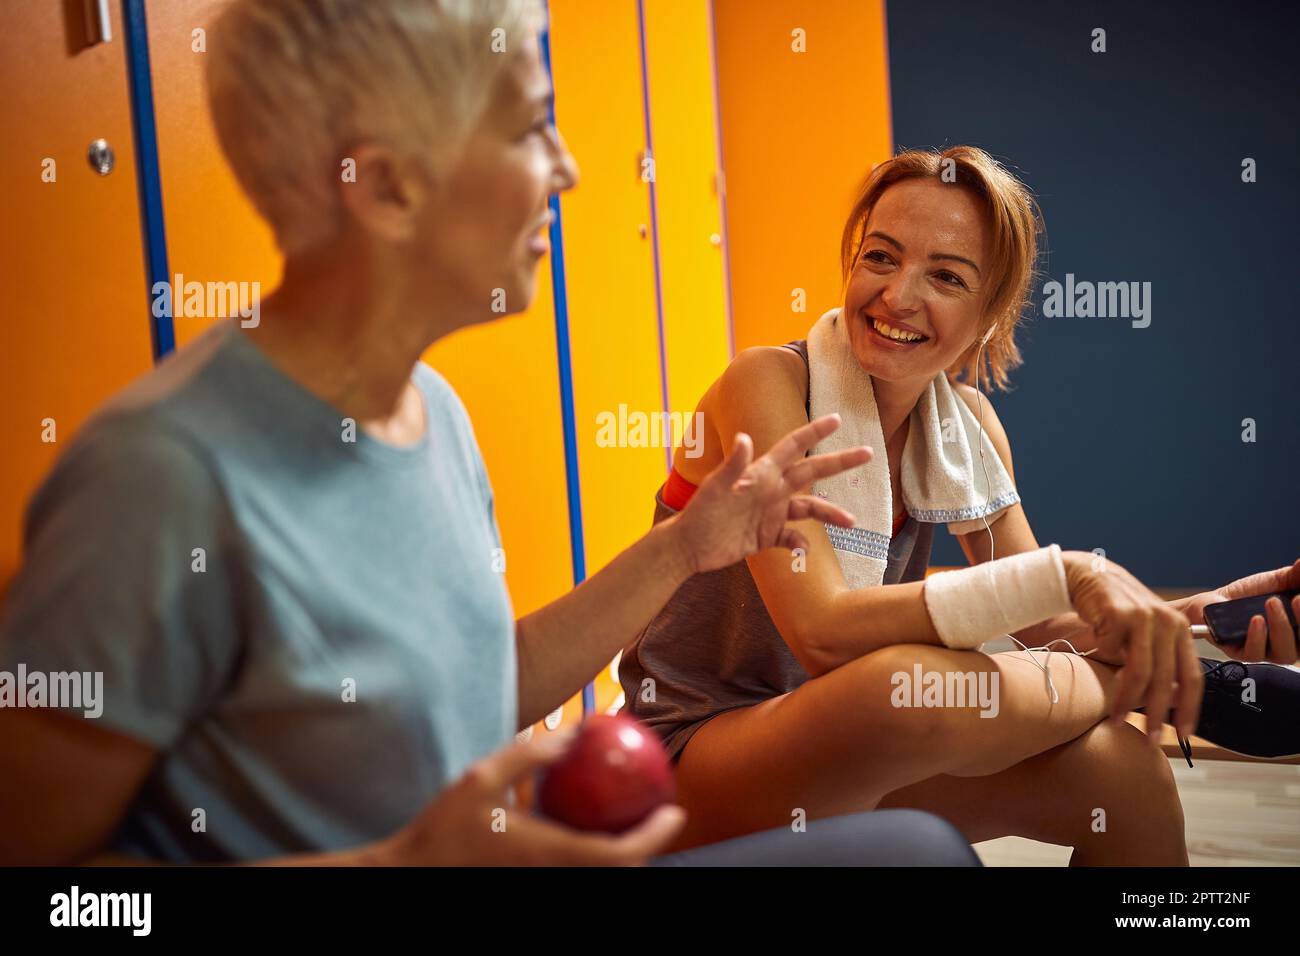 Young woman having a cheerful conversation with senior woman before training in gym locker room. Ready for workuot. Stock Photo